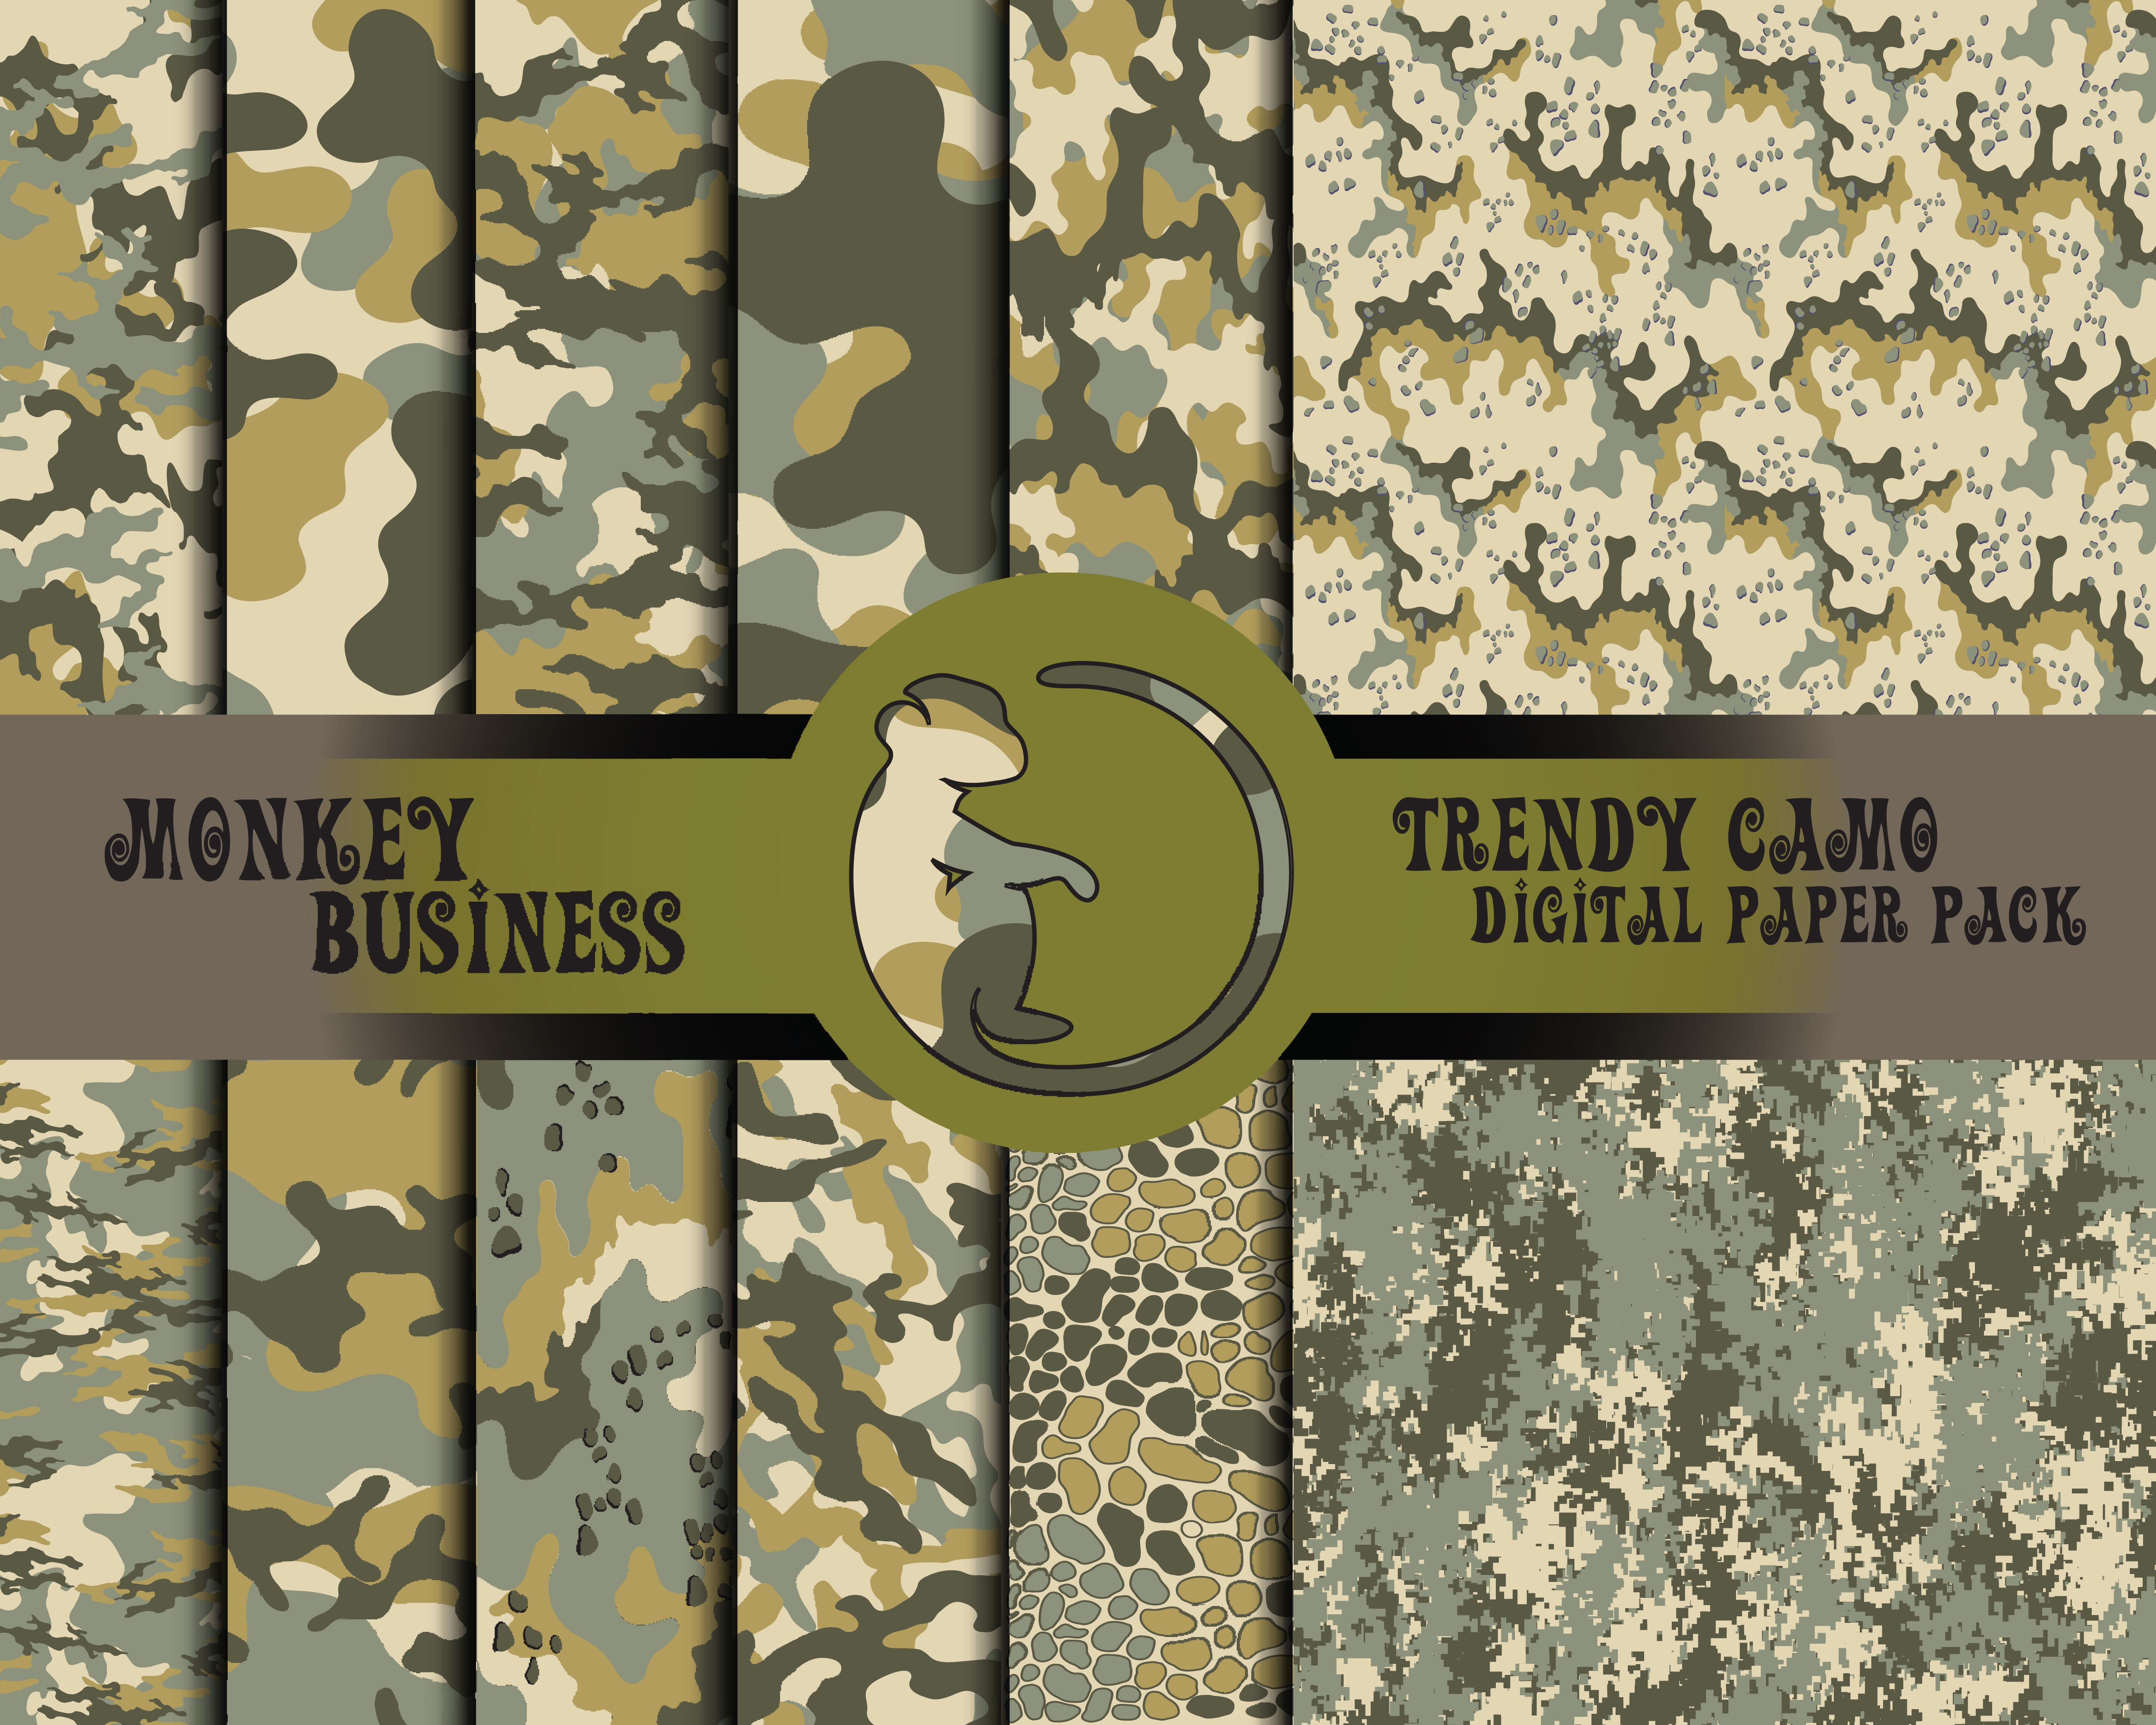 Camouflage Wallpapers Seamless Army Patterns Digital Paper Pack By Monkey Camouflage Design Thehungryjpeg Com